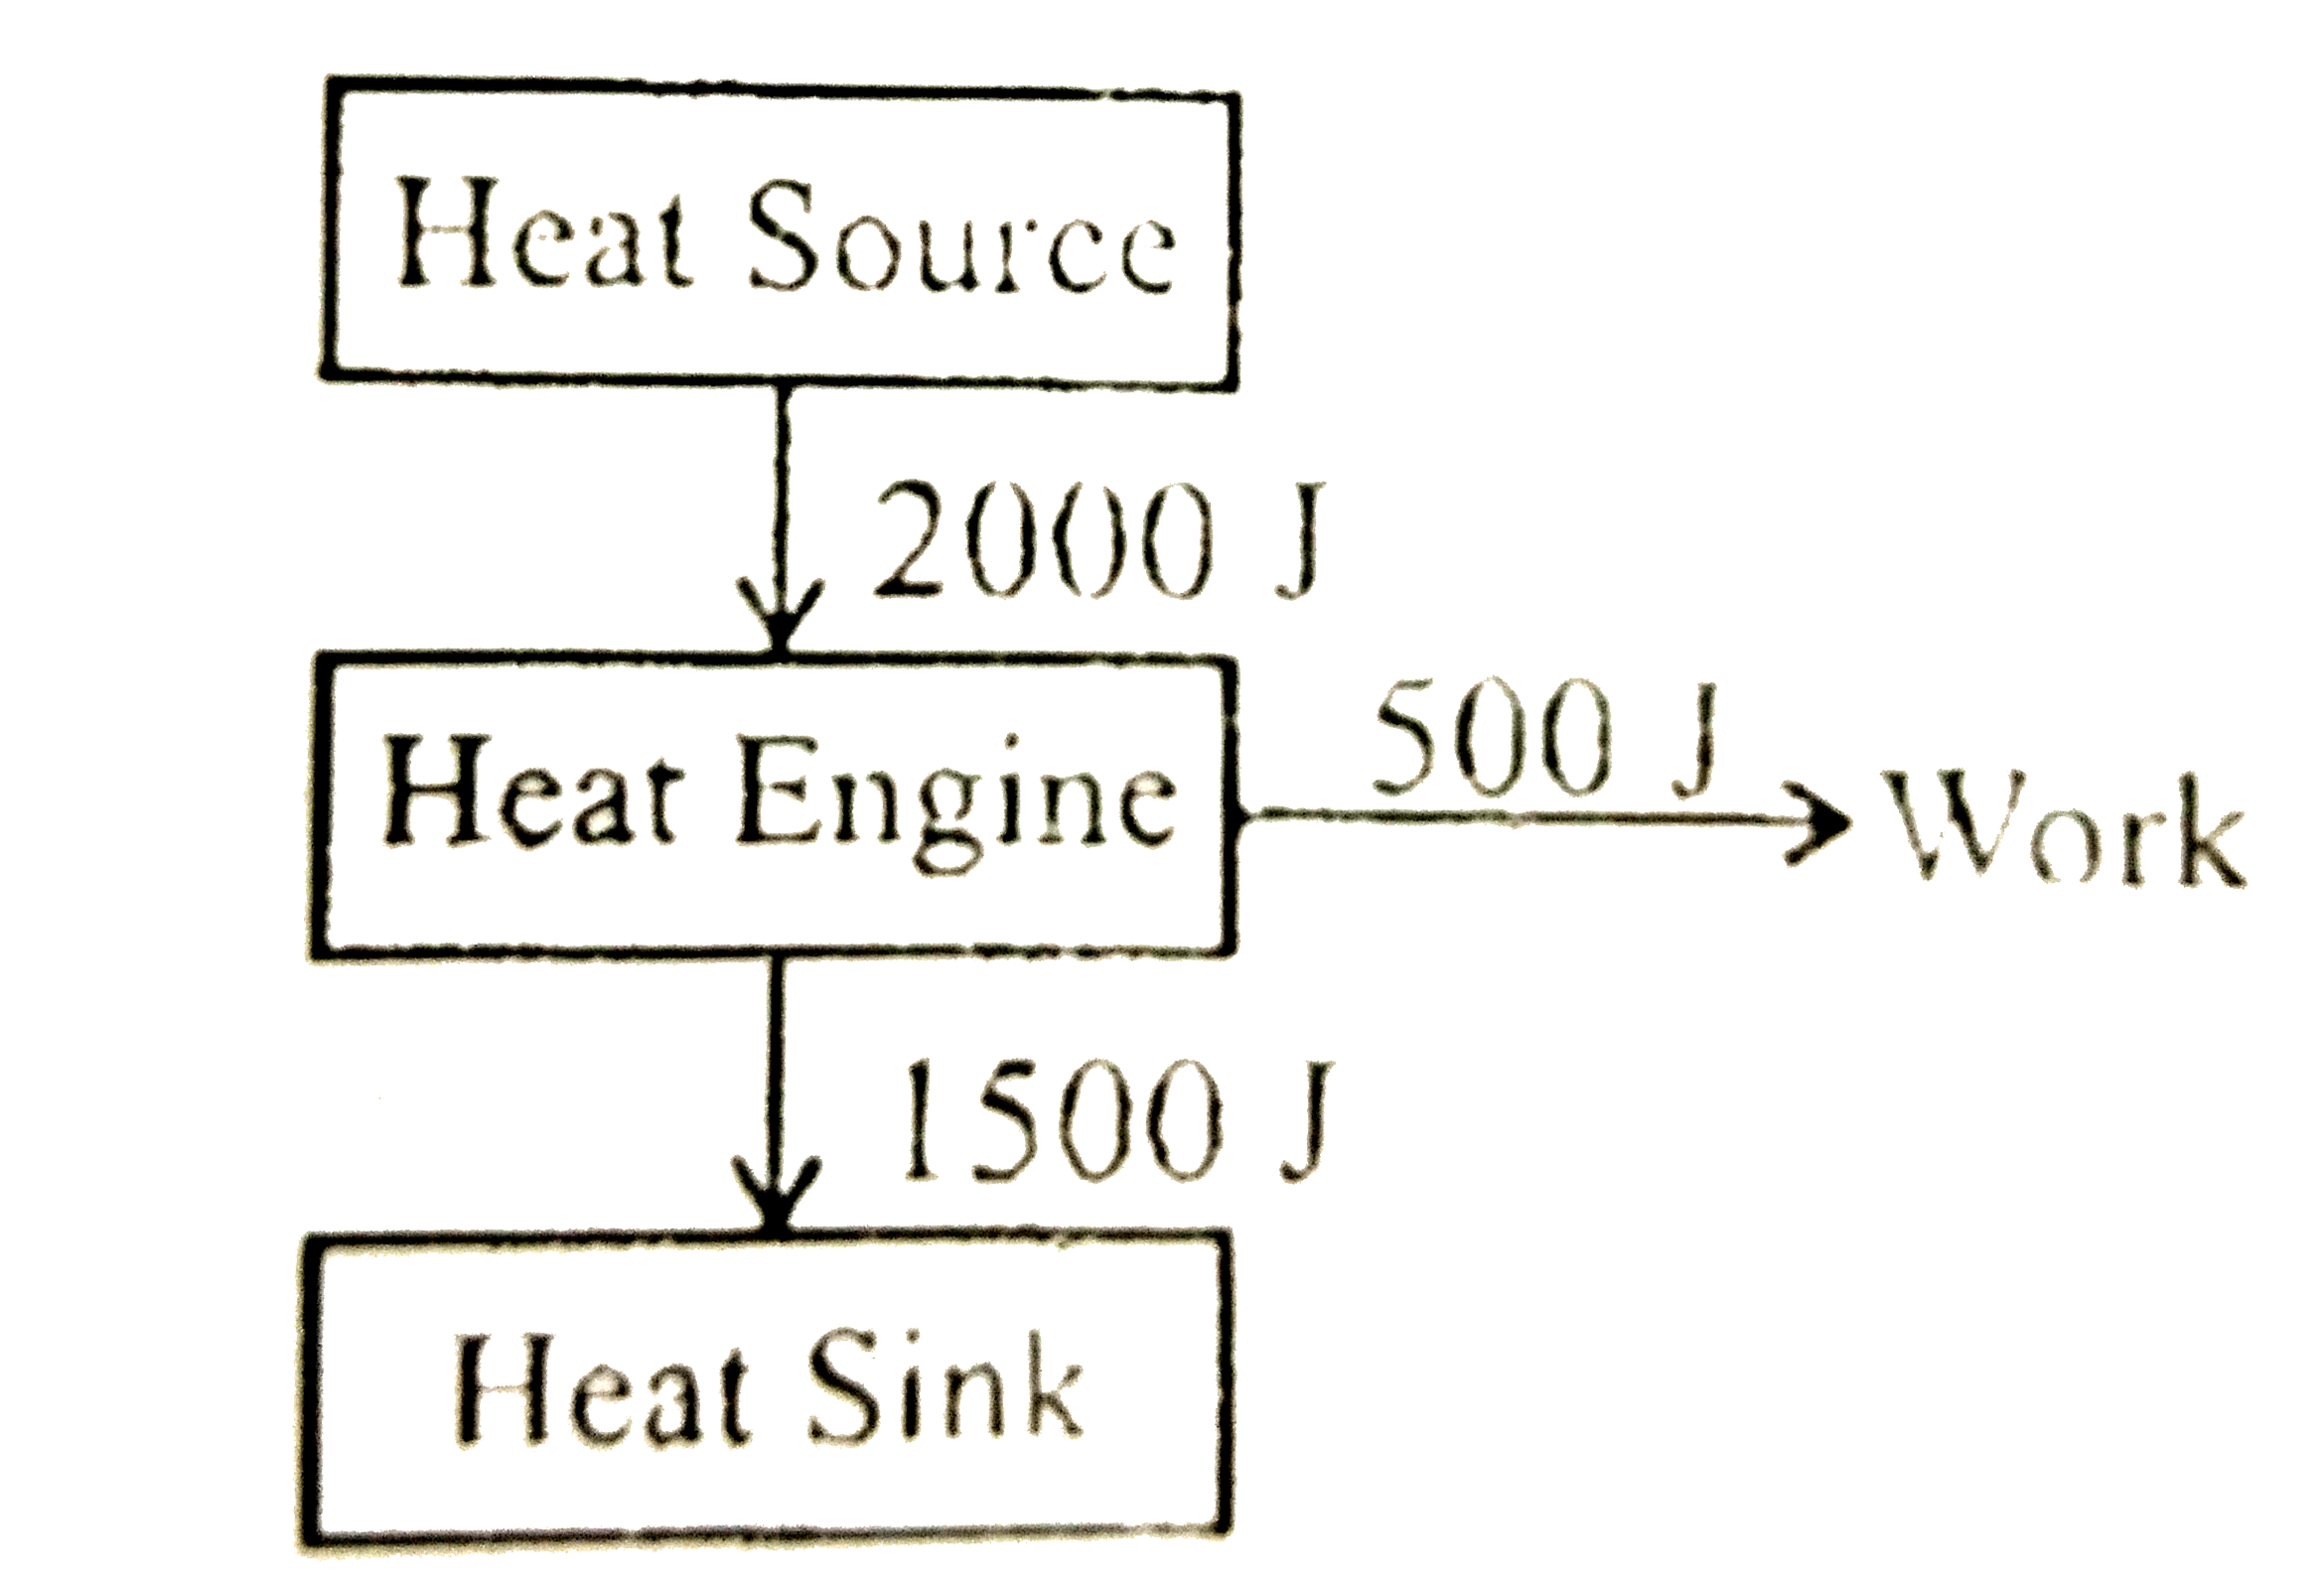 What would be the efficiency of the heat engine diagramed as shown below?